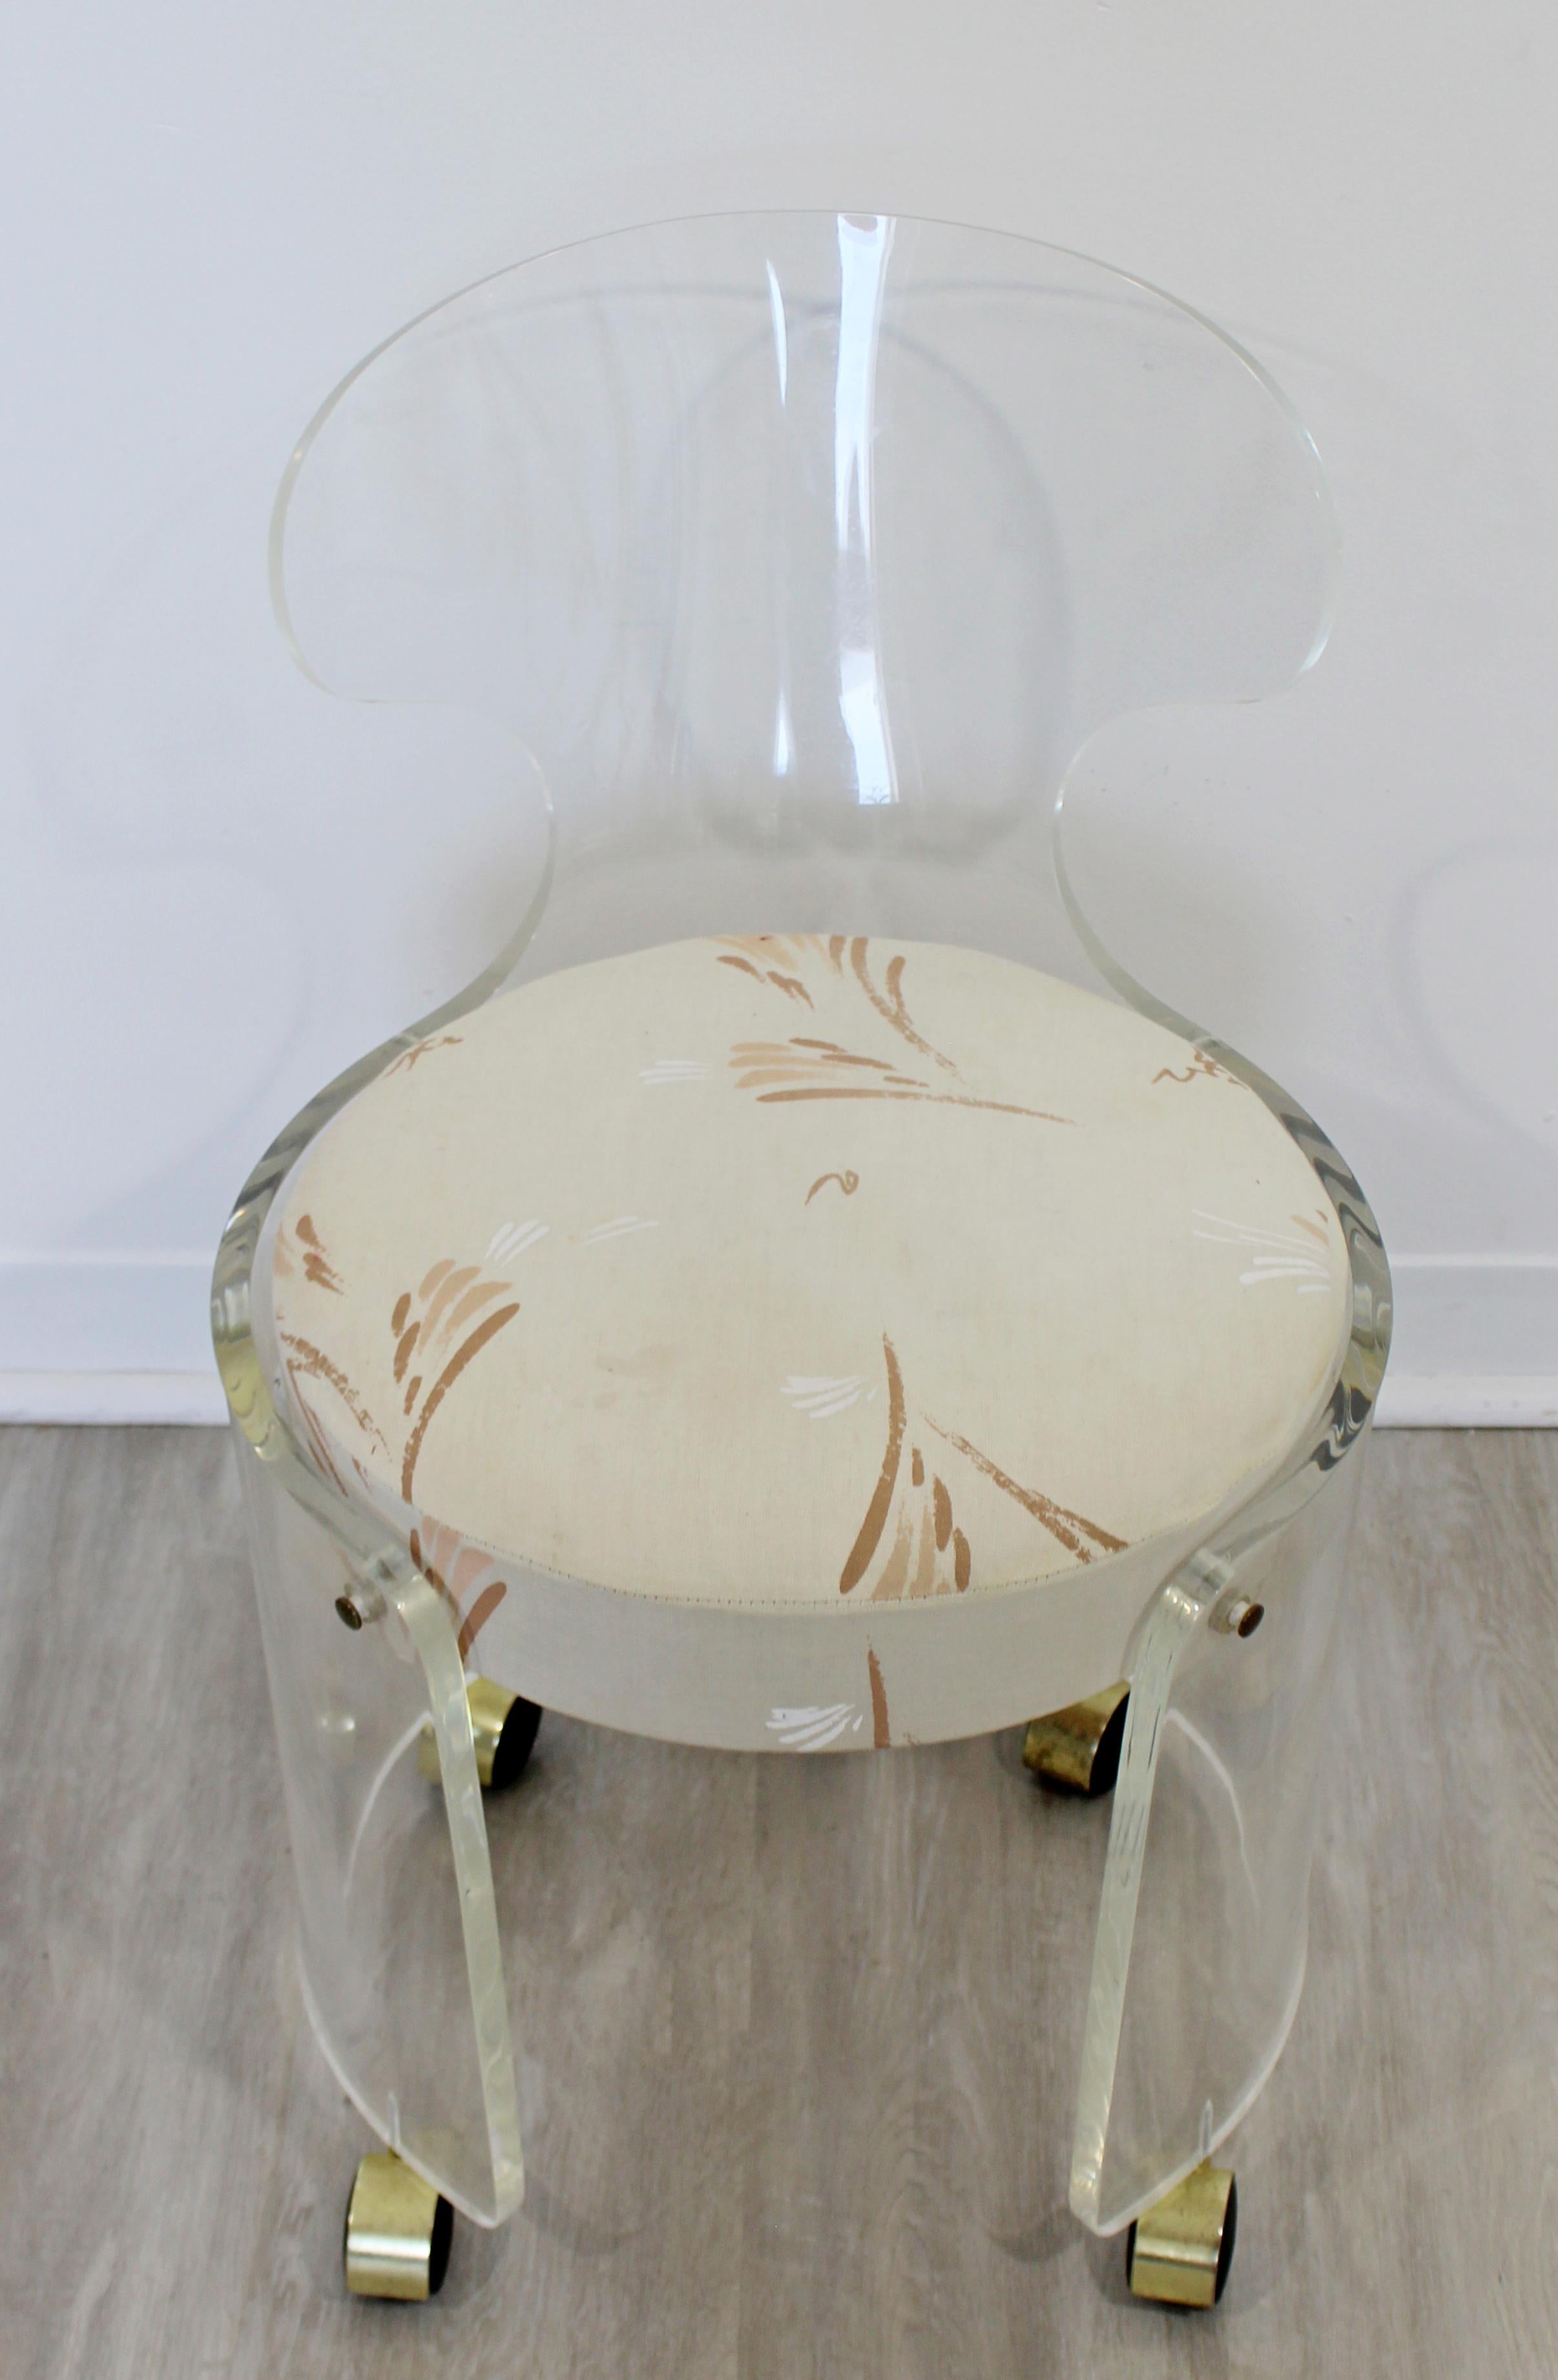 For your consideration is a sweet, Lucite rolling vanity chair, with an original Hill Manufacturing tag, circa 1960s. In excellent vintage condition. The seat could be reupholstered. The dimensions are 16.5